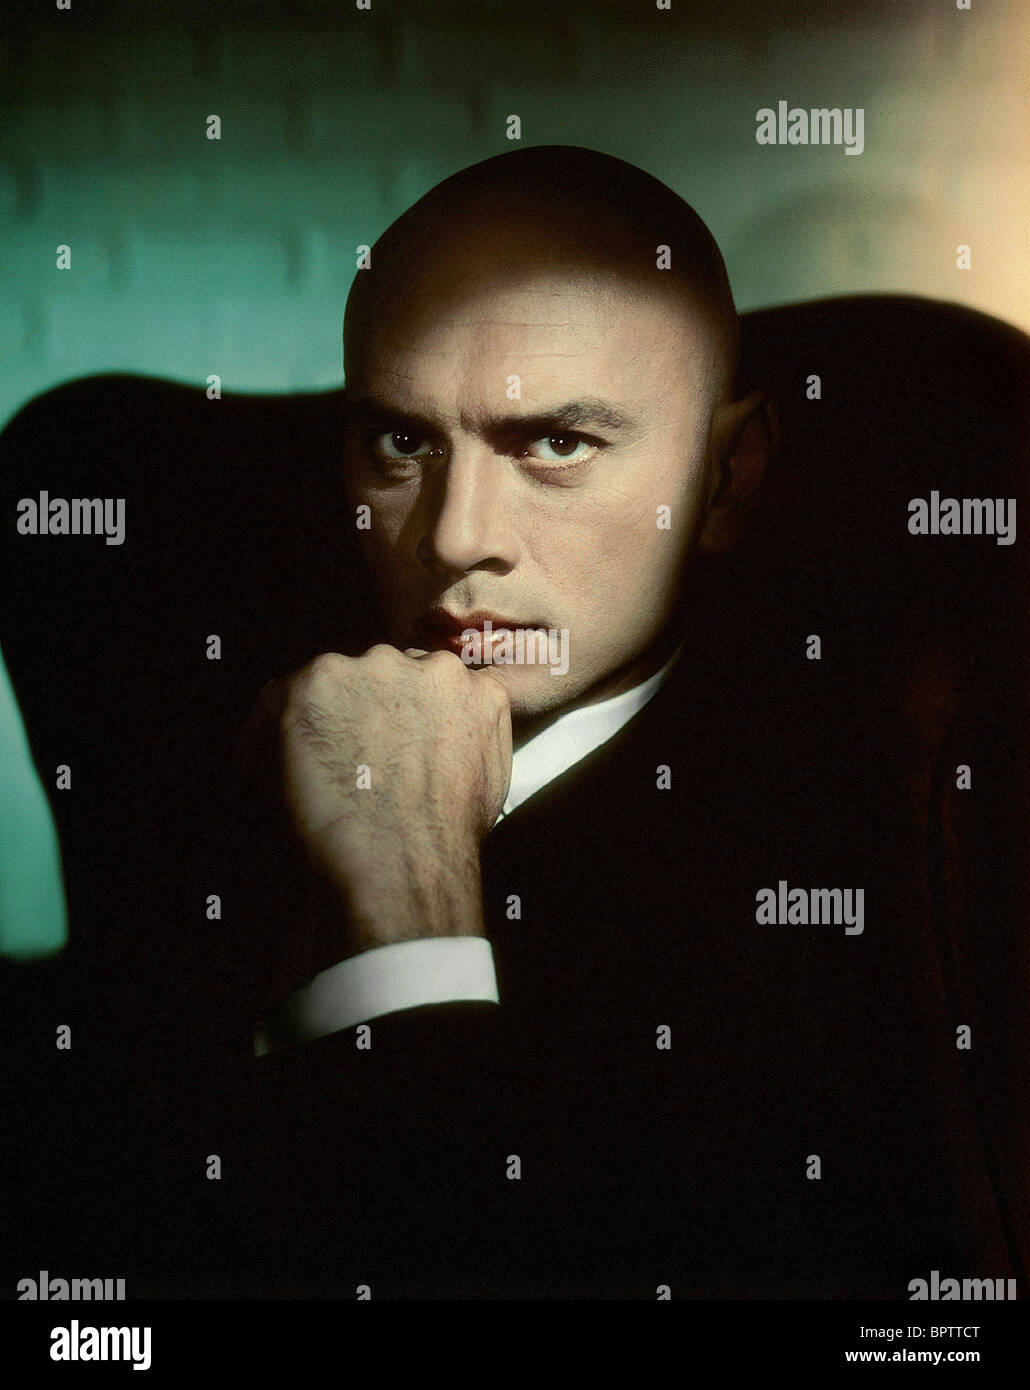 YUL BRYNNER ACTOR (1957) Stock Photo